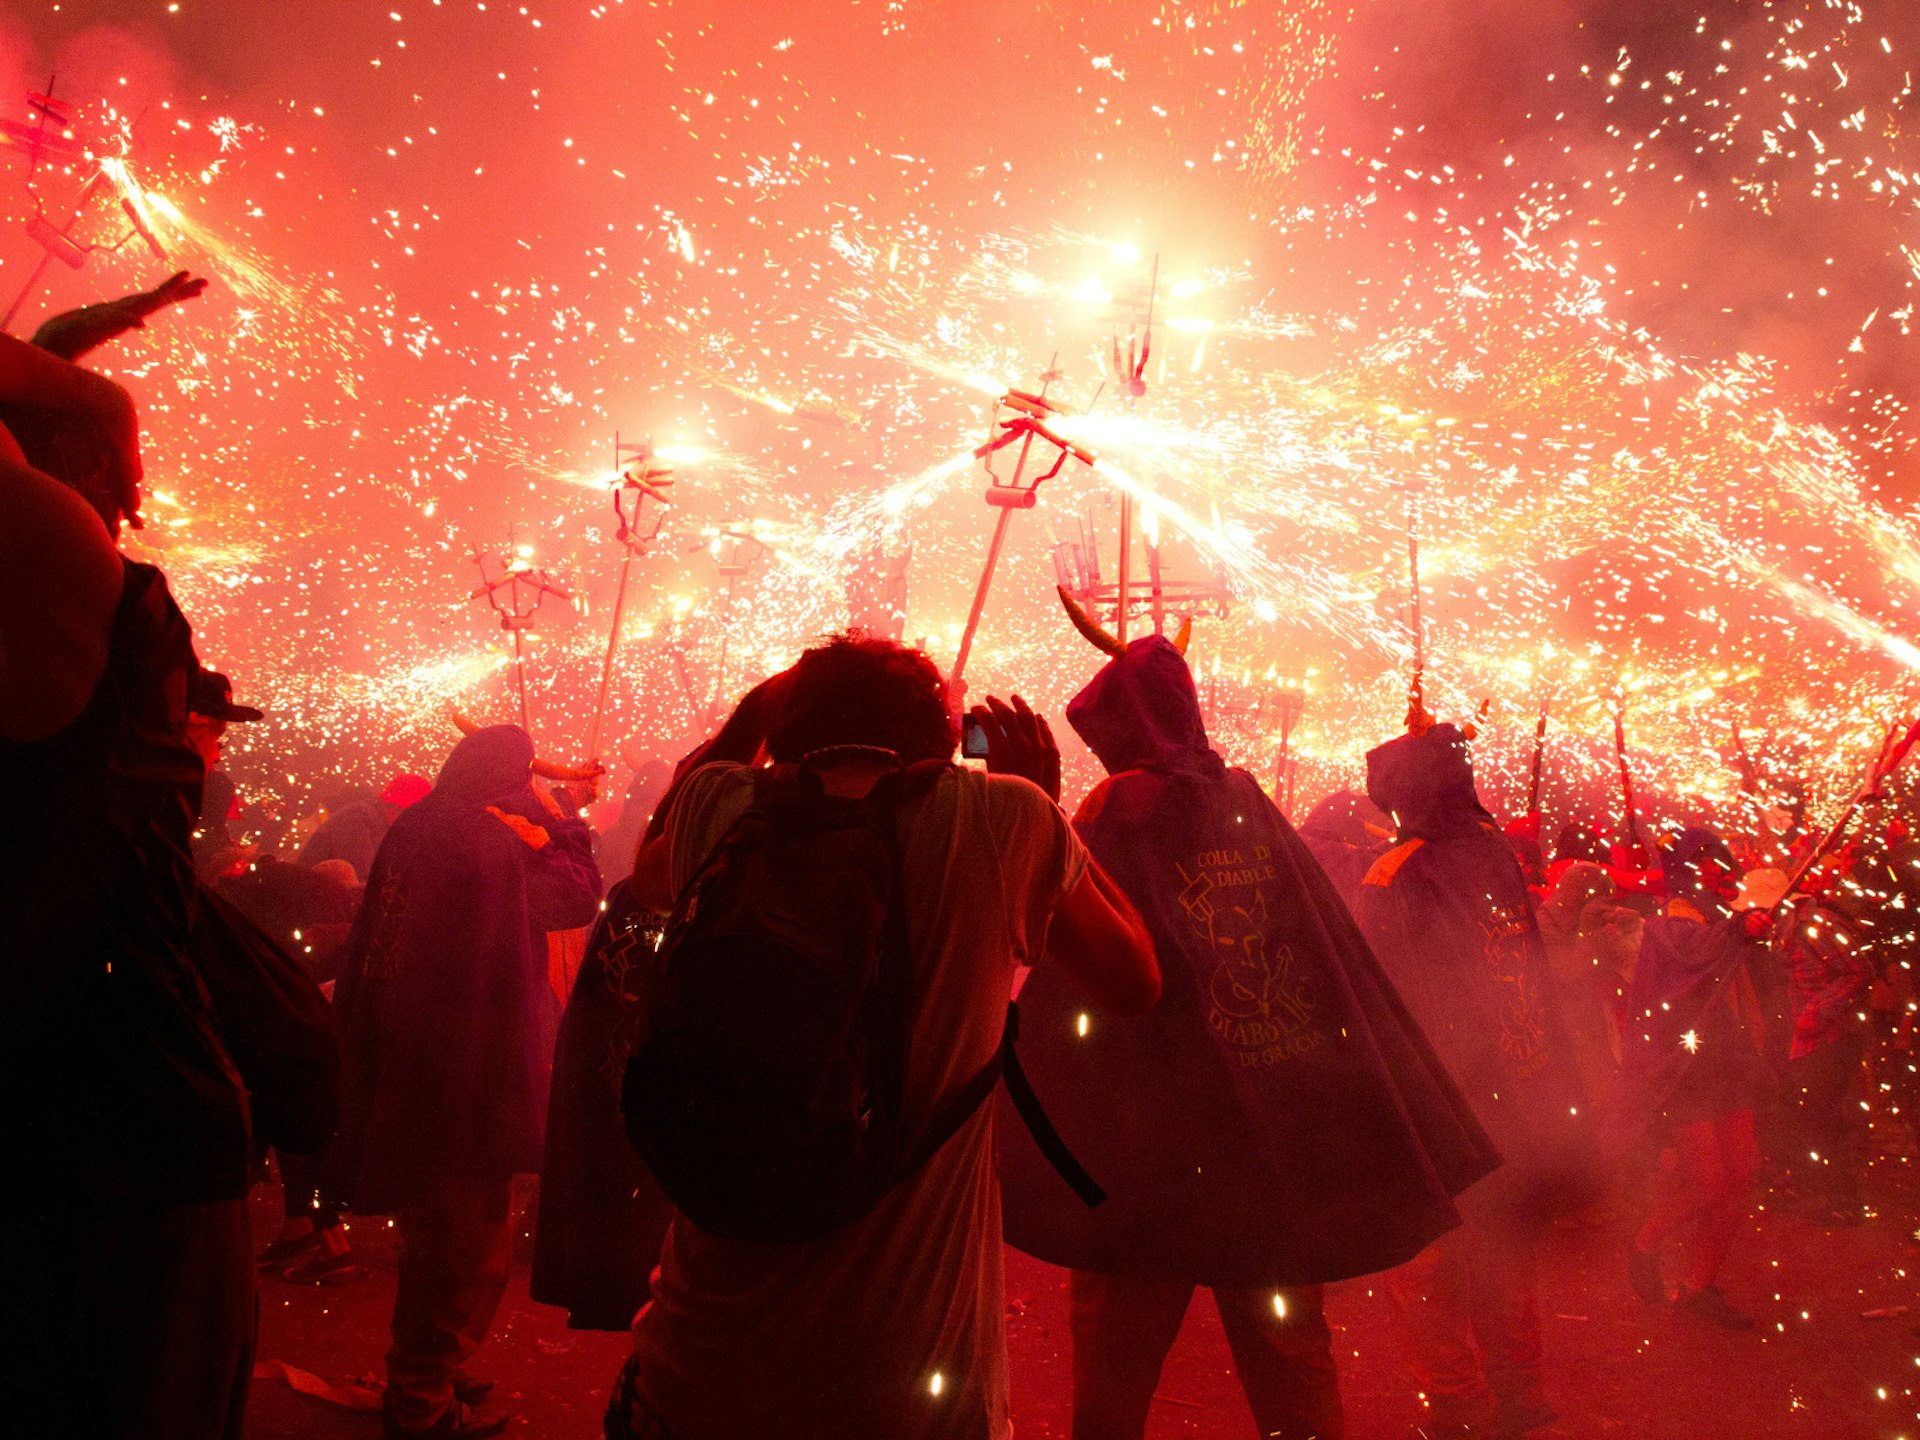 Alternative festivals - people dressed as devils holding fireworks at the end of special sticks. The image is a riot of orange and red sparks with caped and horned figure silhouetted against the light